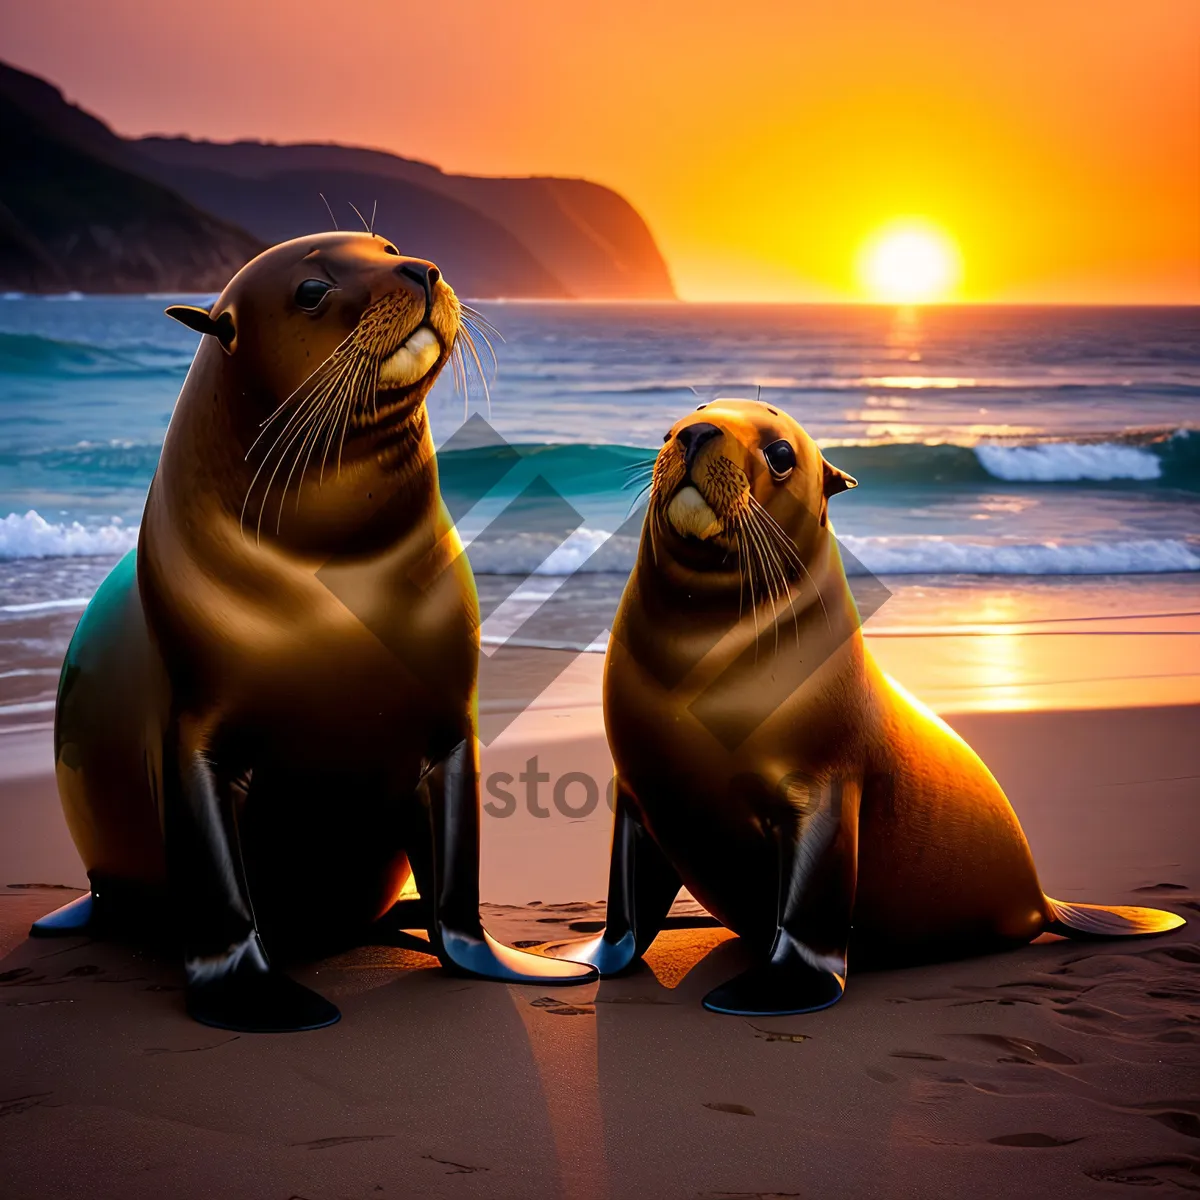 Picture of Serenity at Sunset: Coastal Ocean View with Seals